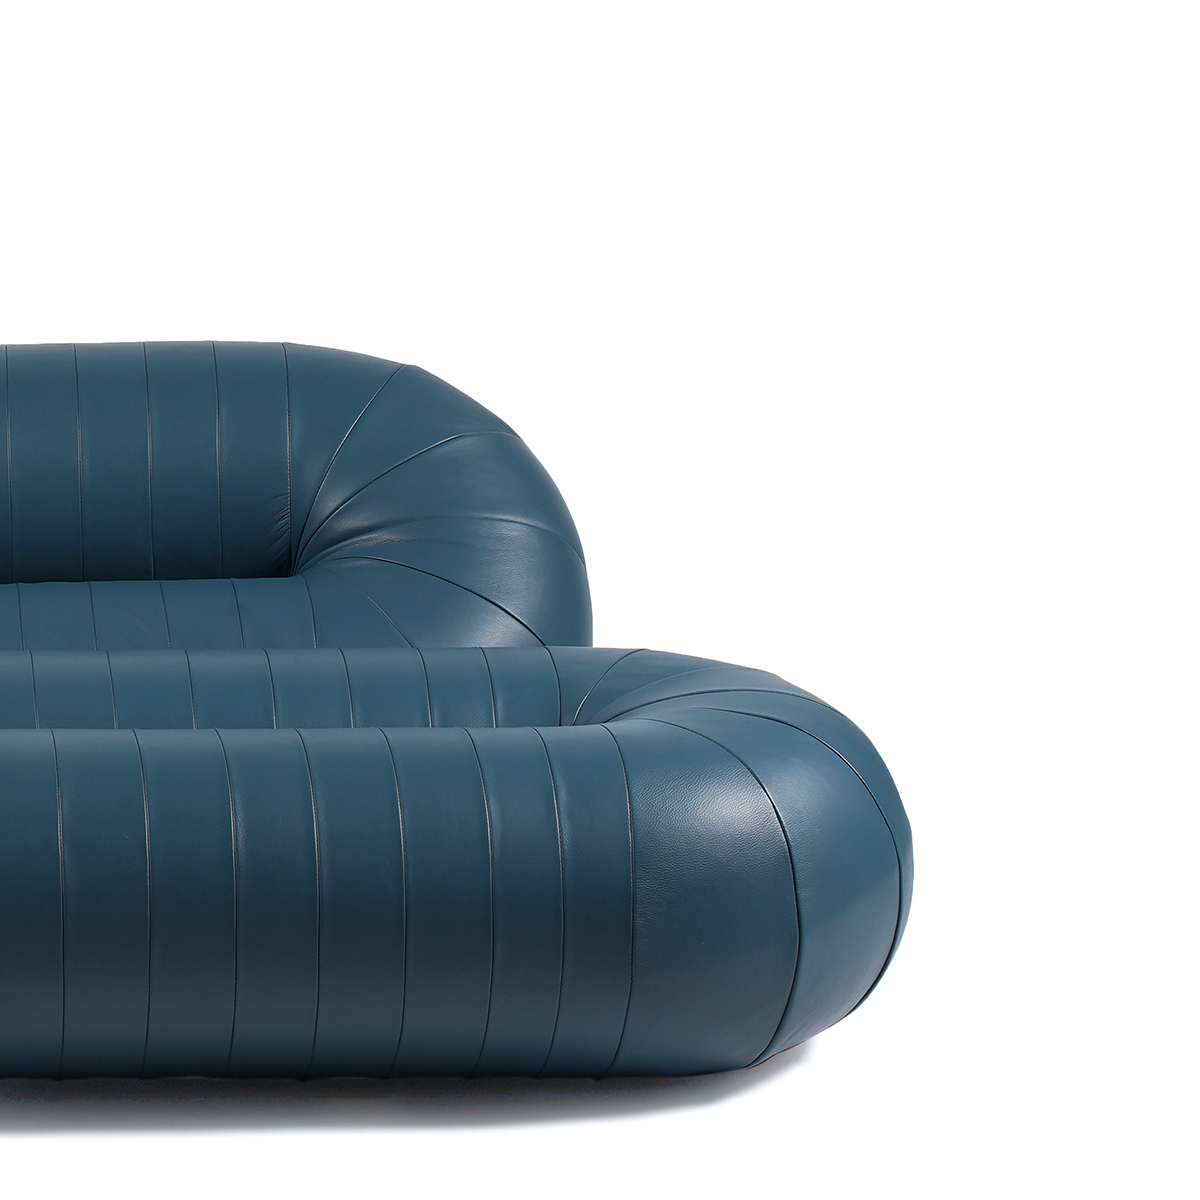 Serpentine lounge sofa system in leather by Christophe de la Fontaine DANTE - Goods and Bads